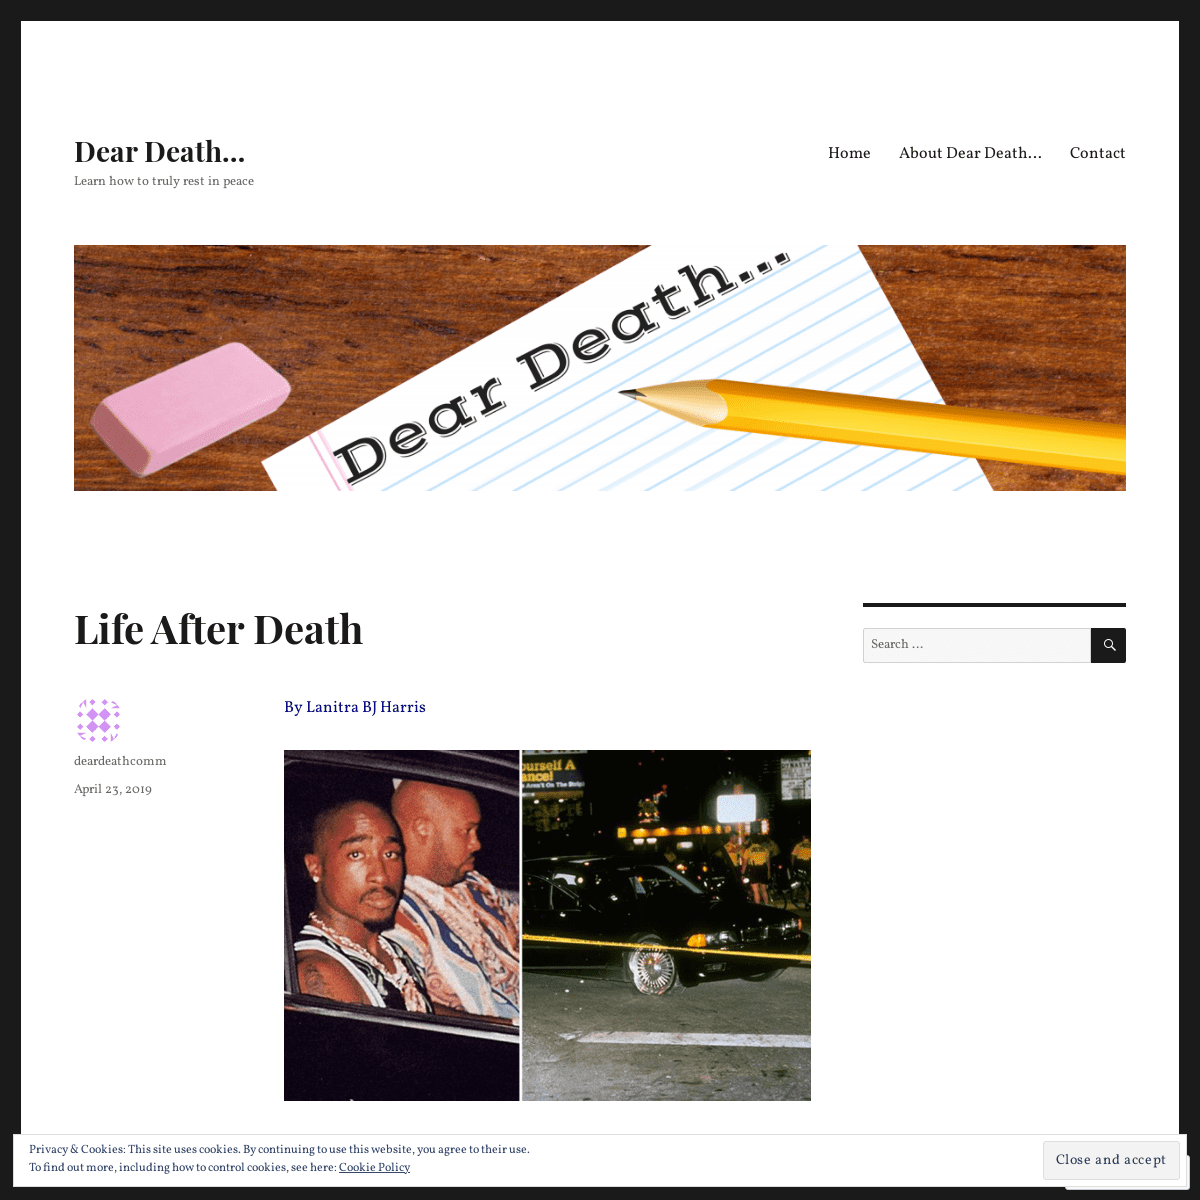 A complete backup of https://deardeathcomm.wordpress.com/2019/04/23/life-after-death/